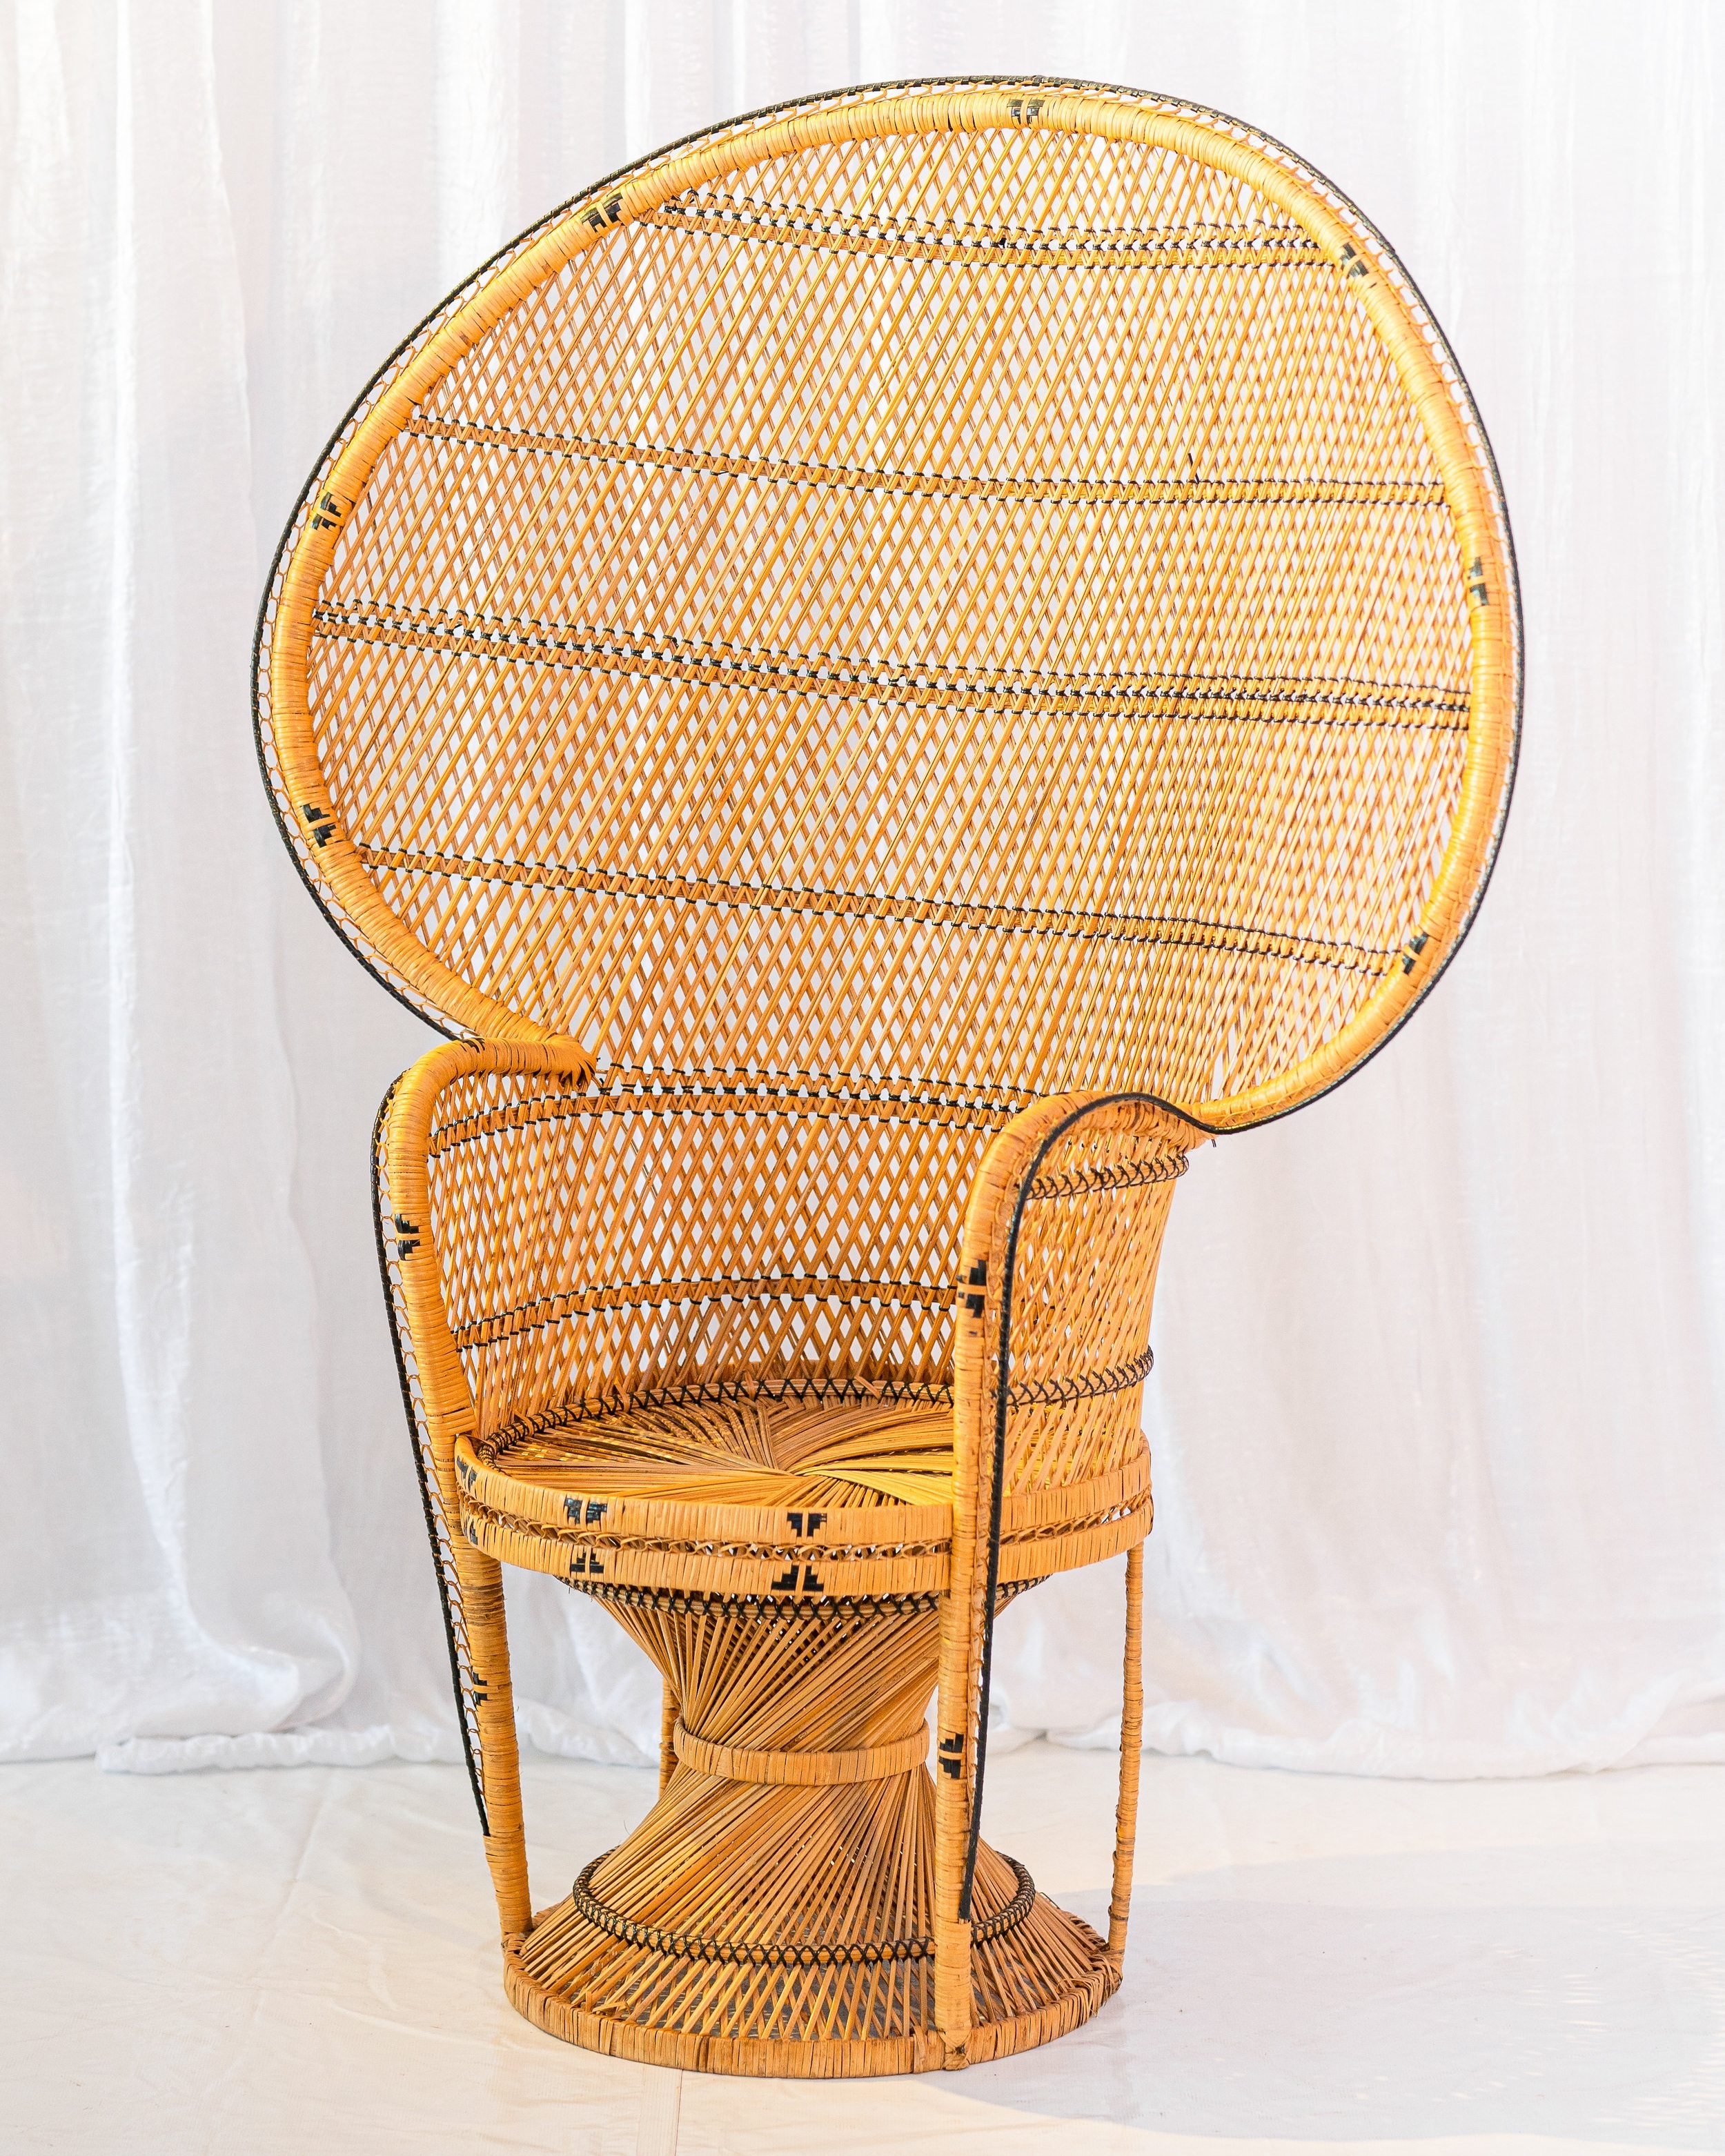 Austin Chair And Table Rental Vintage Furniture Rentals For All